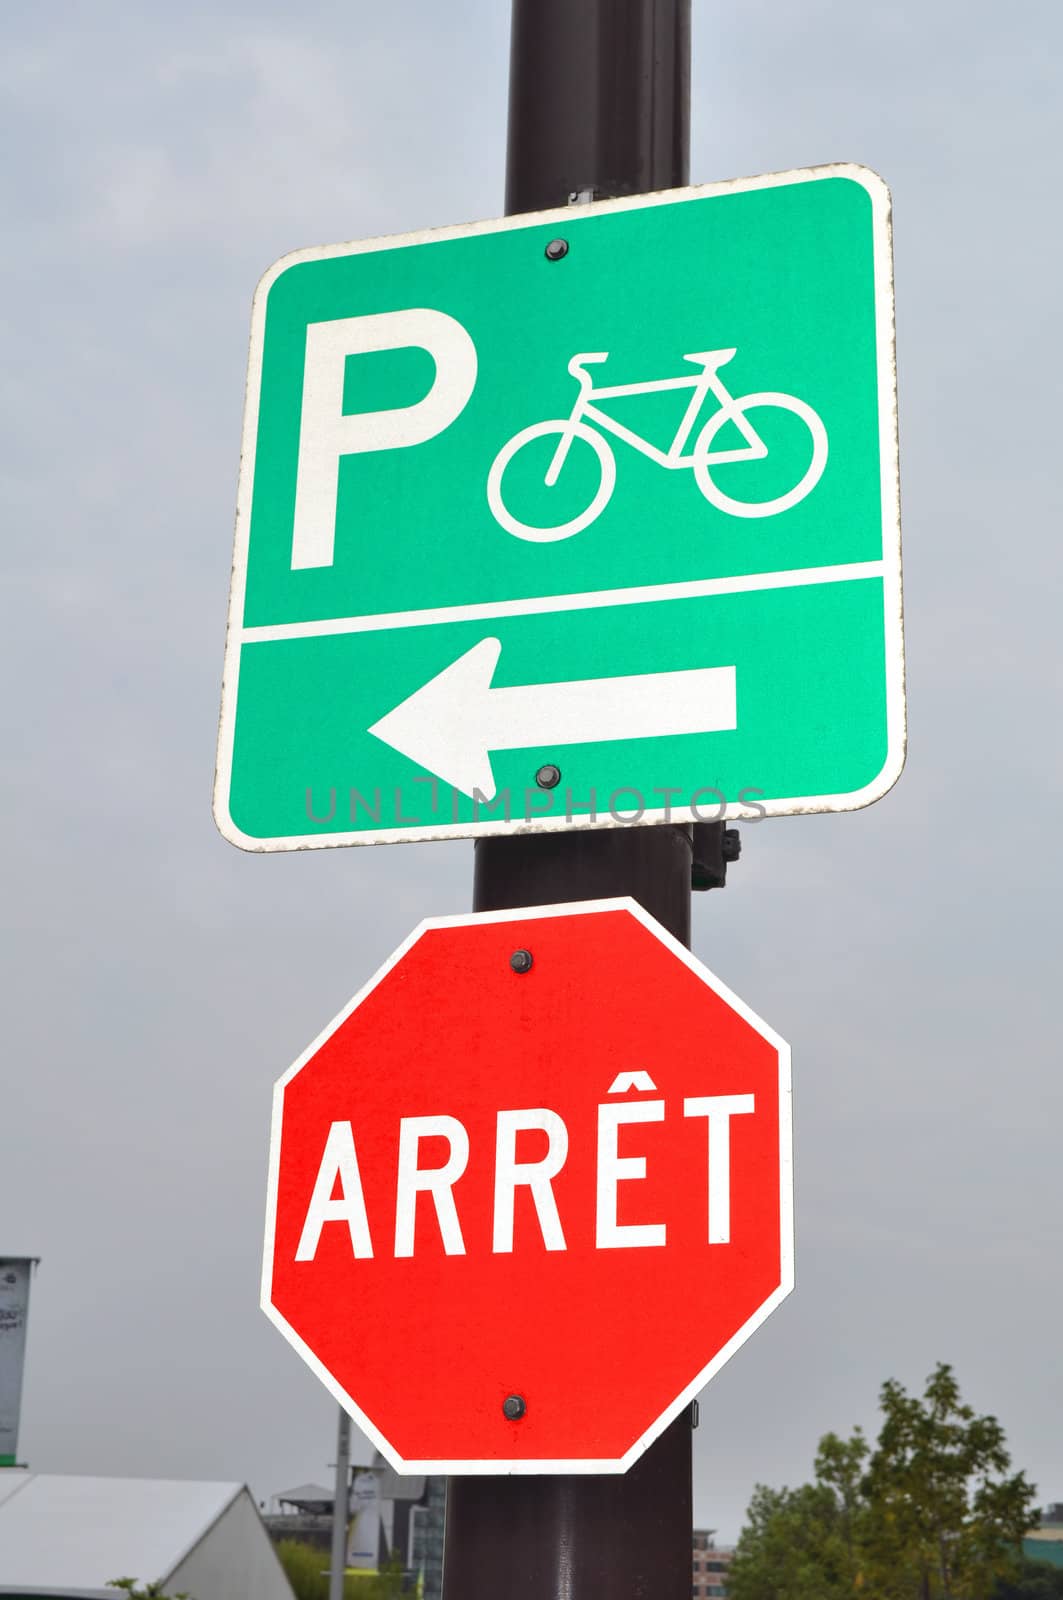 Stop (arret) and bicycle parking sign, in French